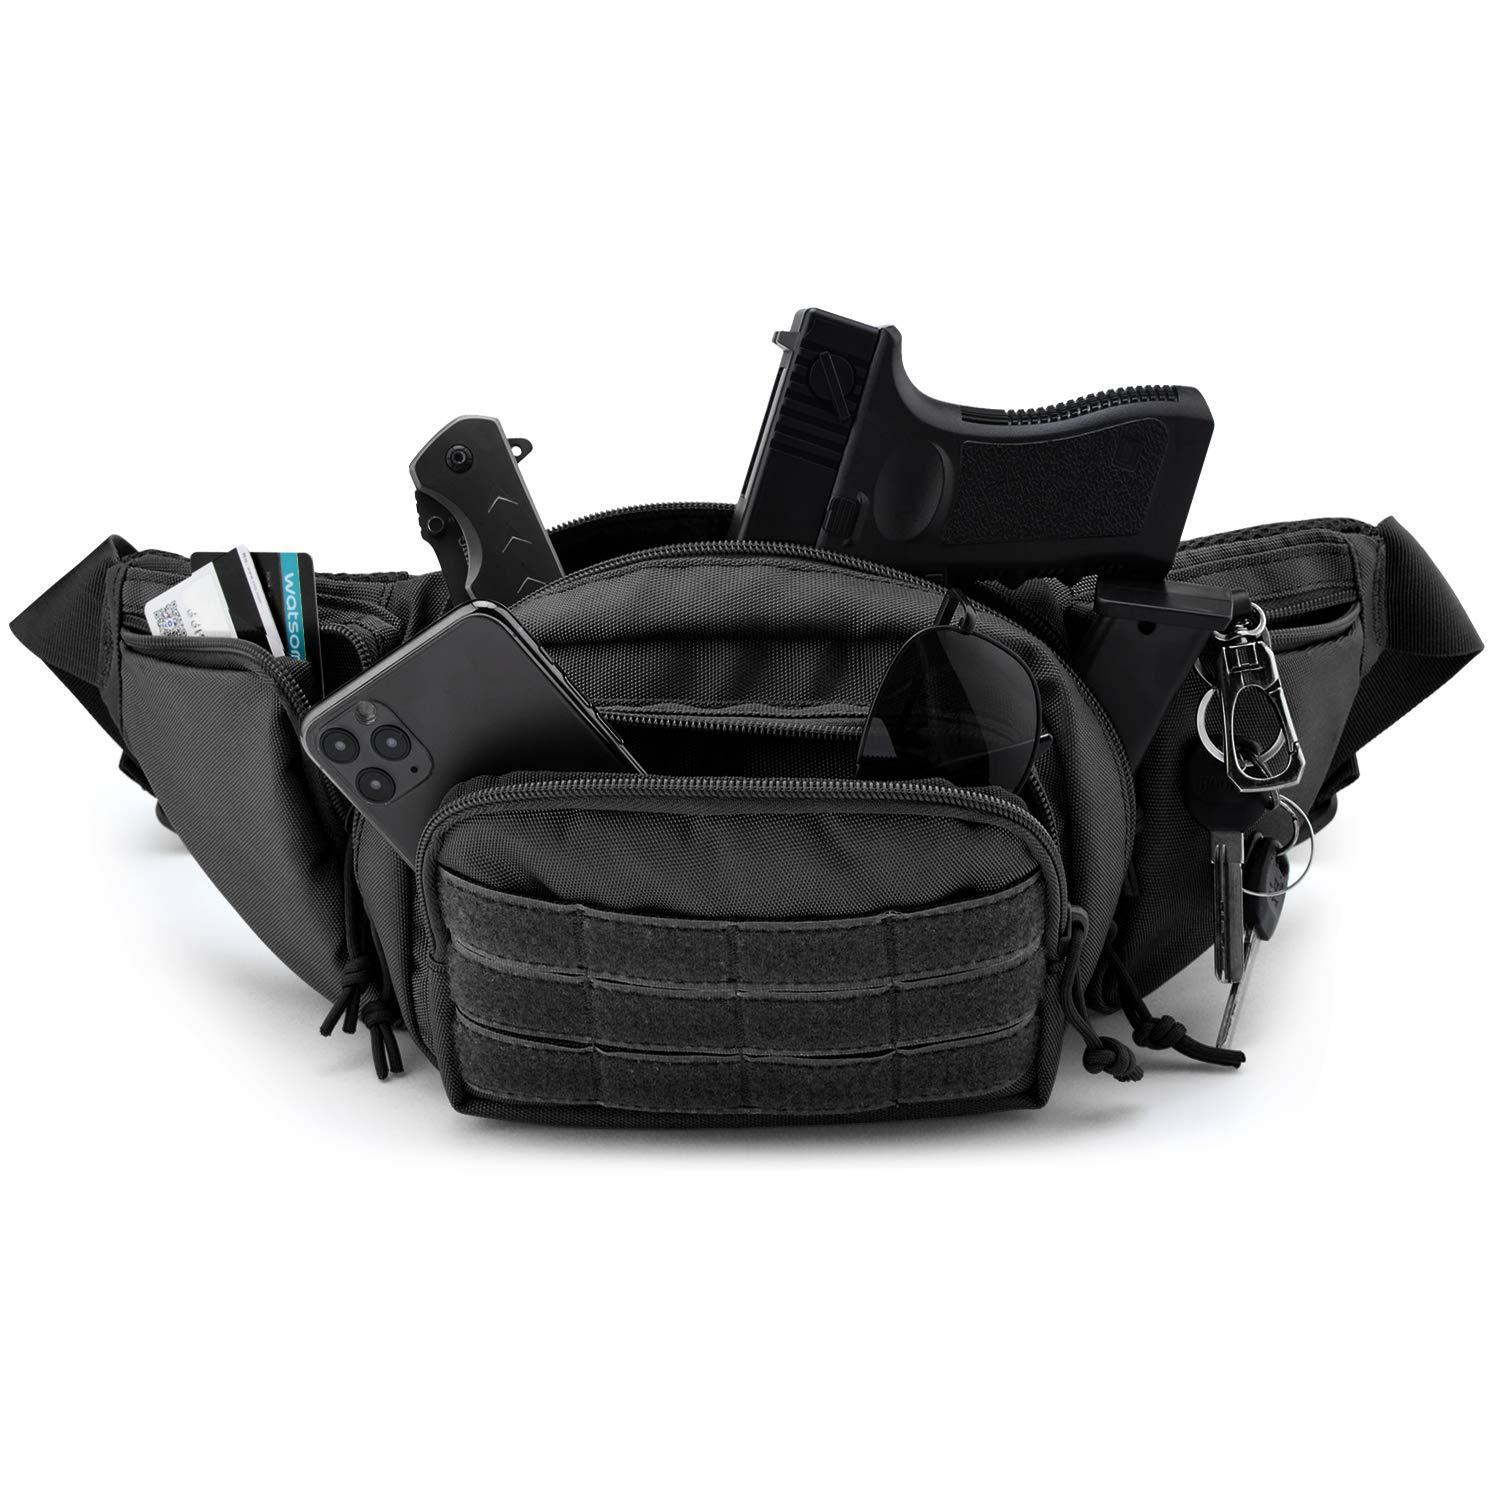 Last day 48% OFF 🔥 Ultimate Fanny Pack Holsterd